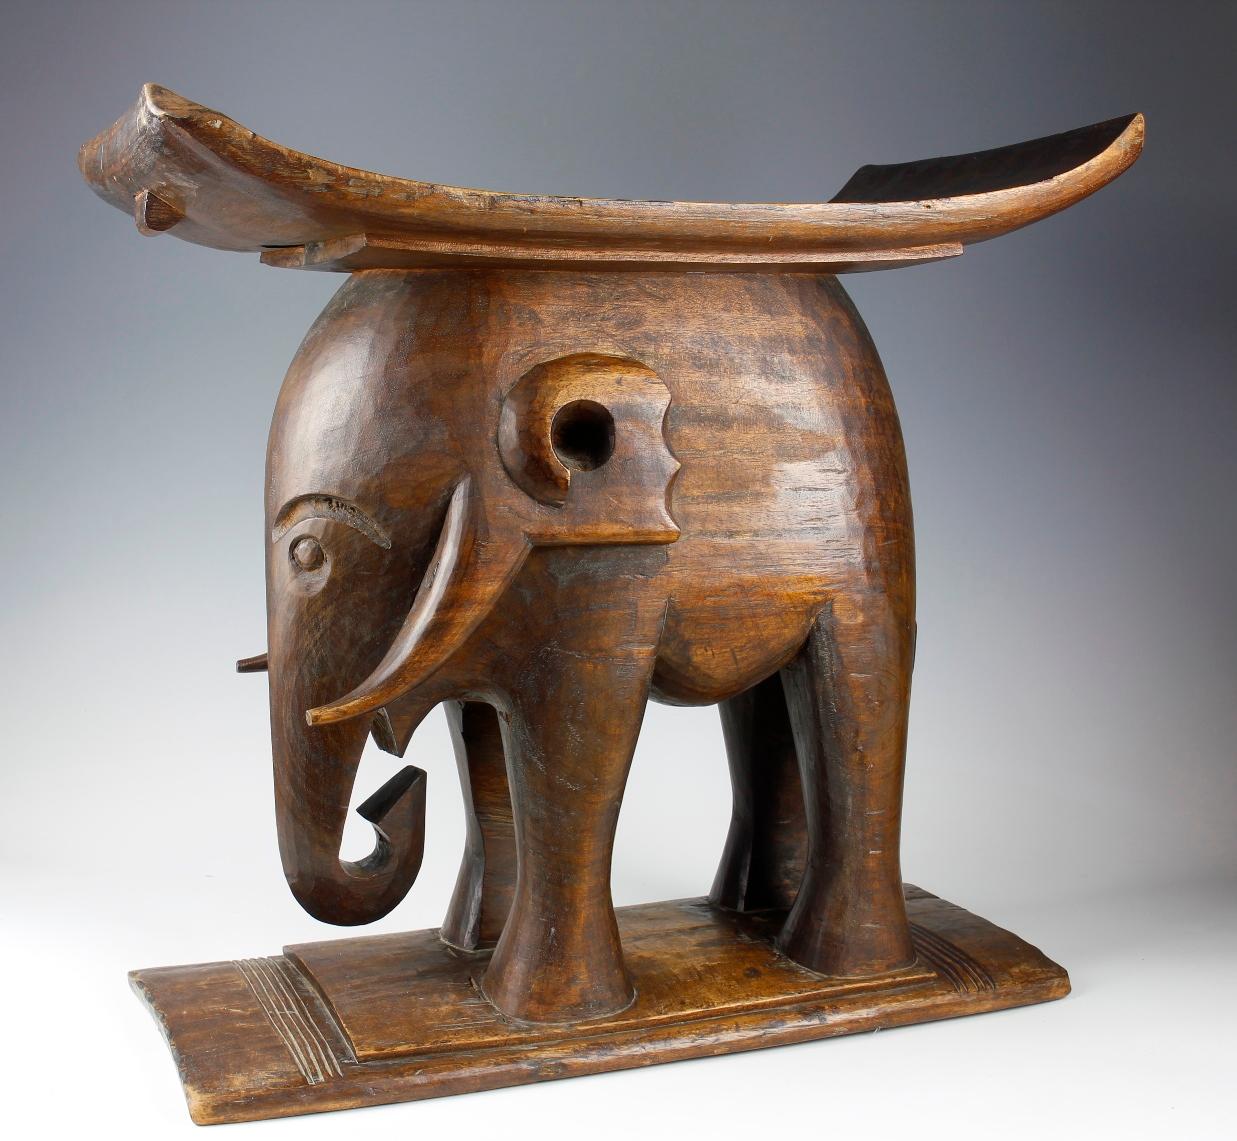 This impressive early twentieth-century stool, from the Ashanti culture in Ghana, depicts an elephant - an Ashanti symbol of power and strength. Finely carved from a heavy brown wood, this large stool had a spiritual meaning alongside its functional